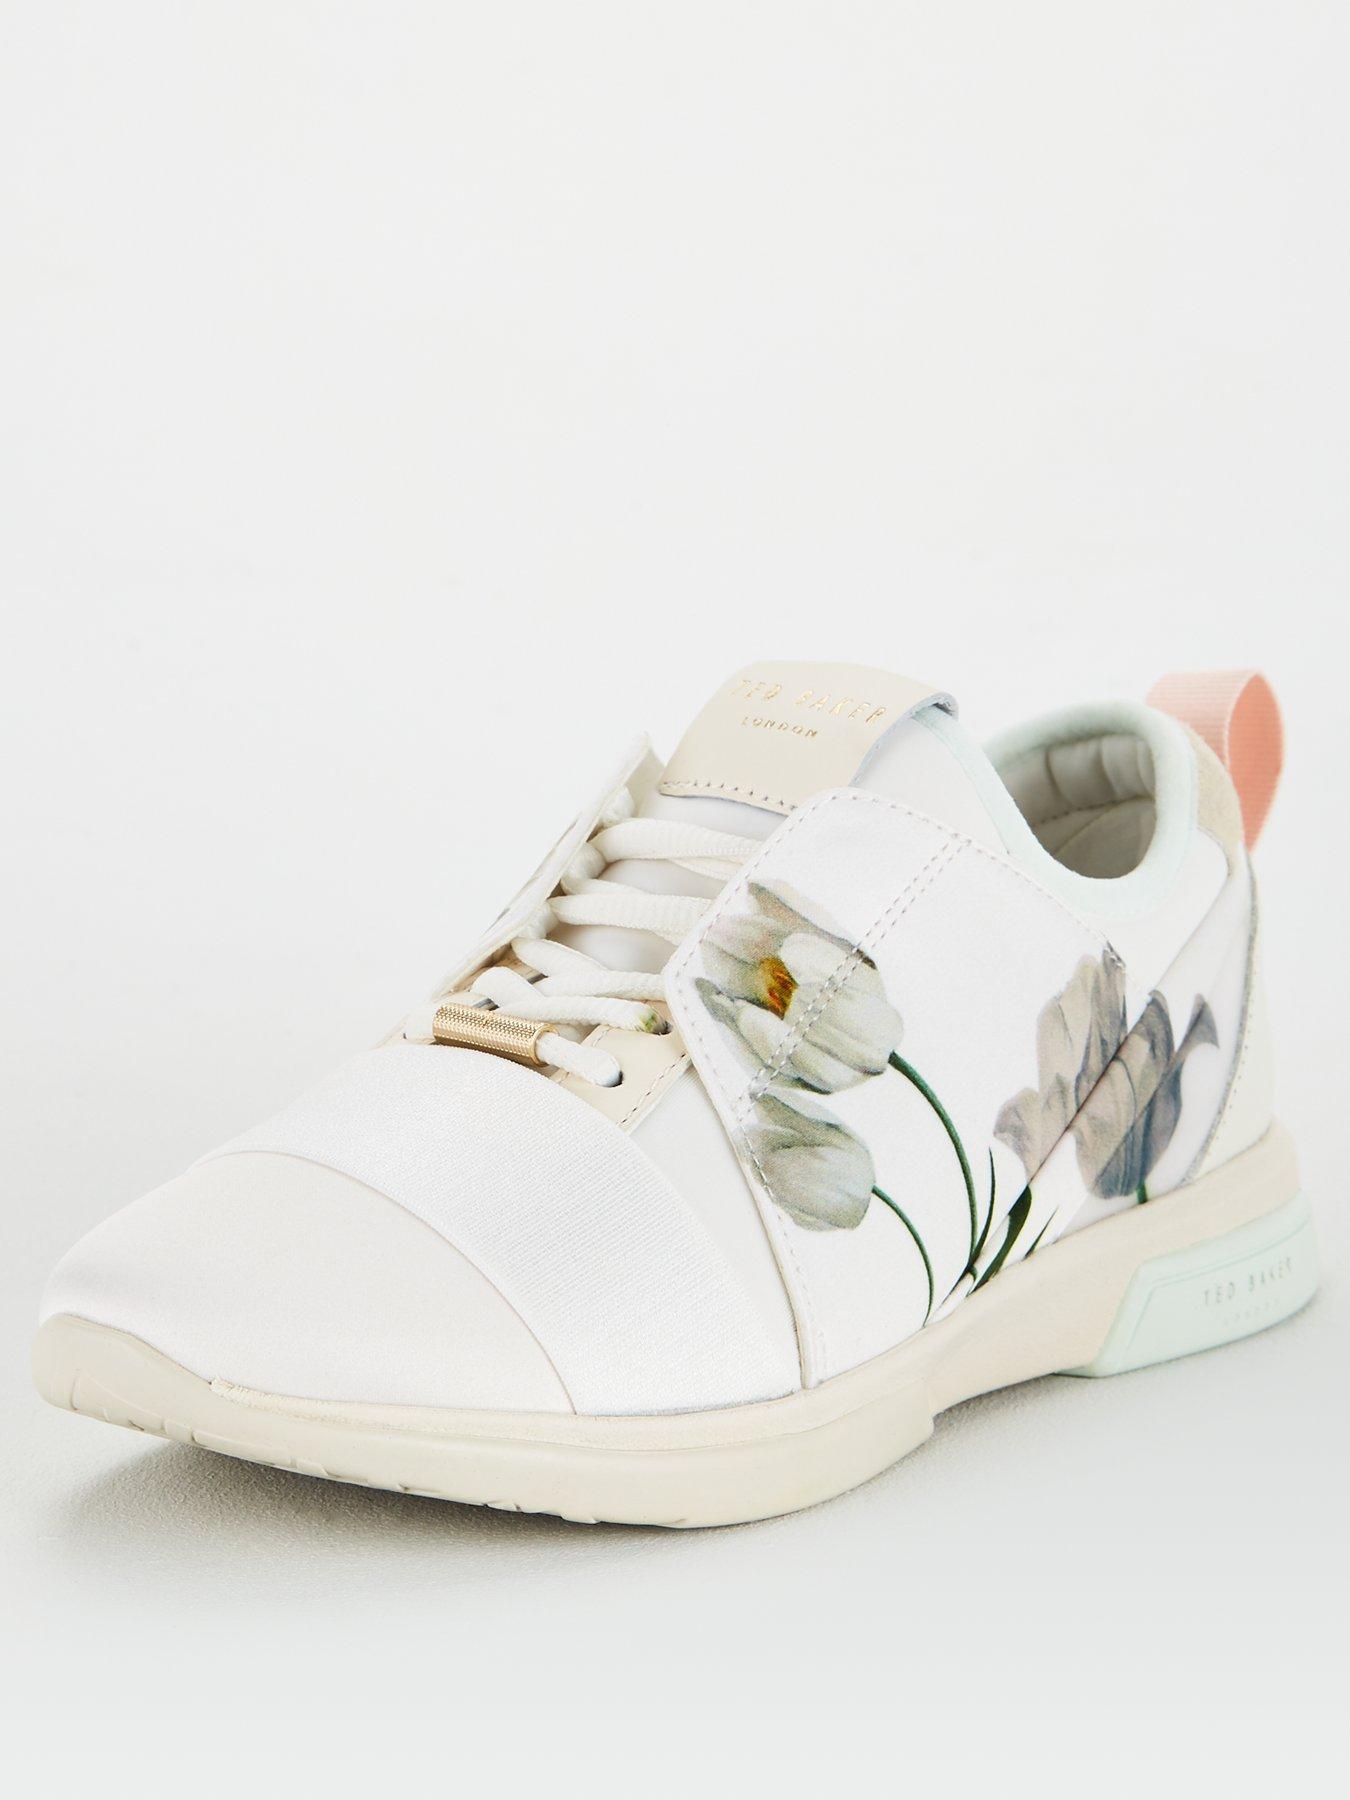 Ted baker | Shoes \u0026 boots | Women 